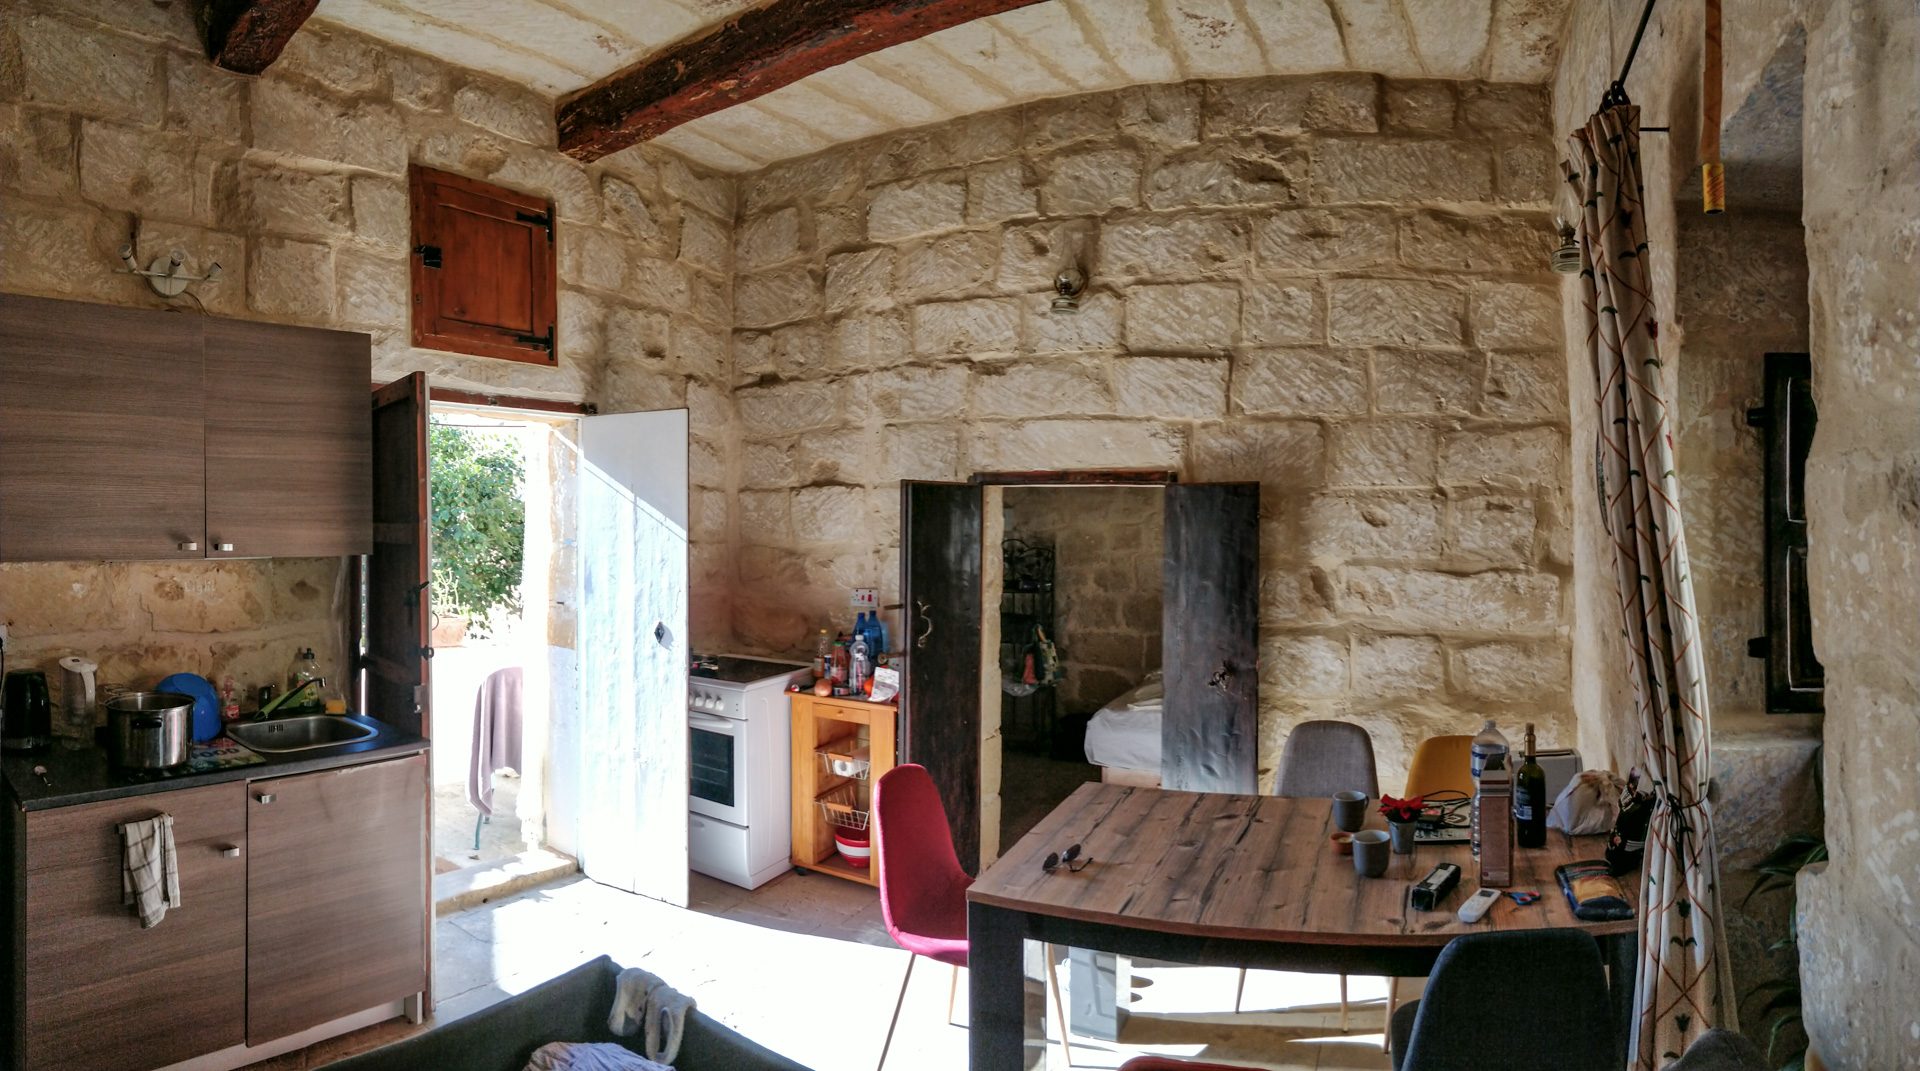 Inside our 300+ year old Maltese country house